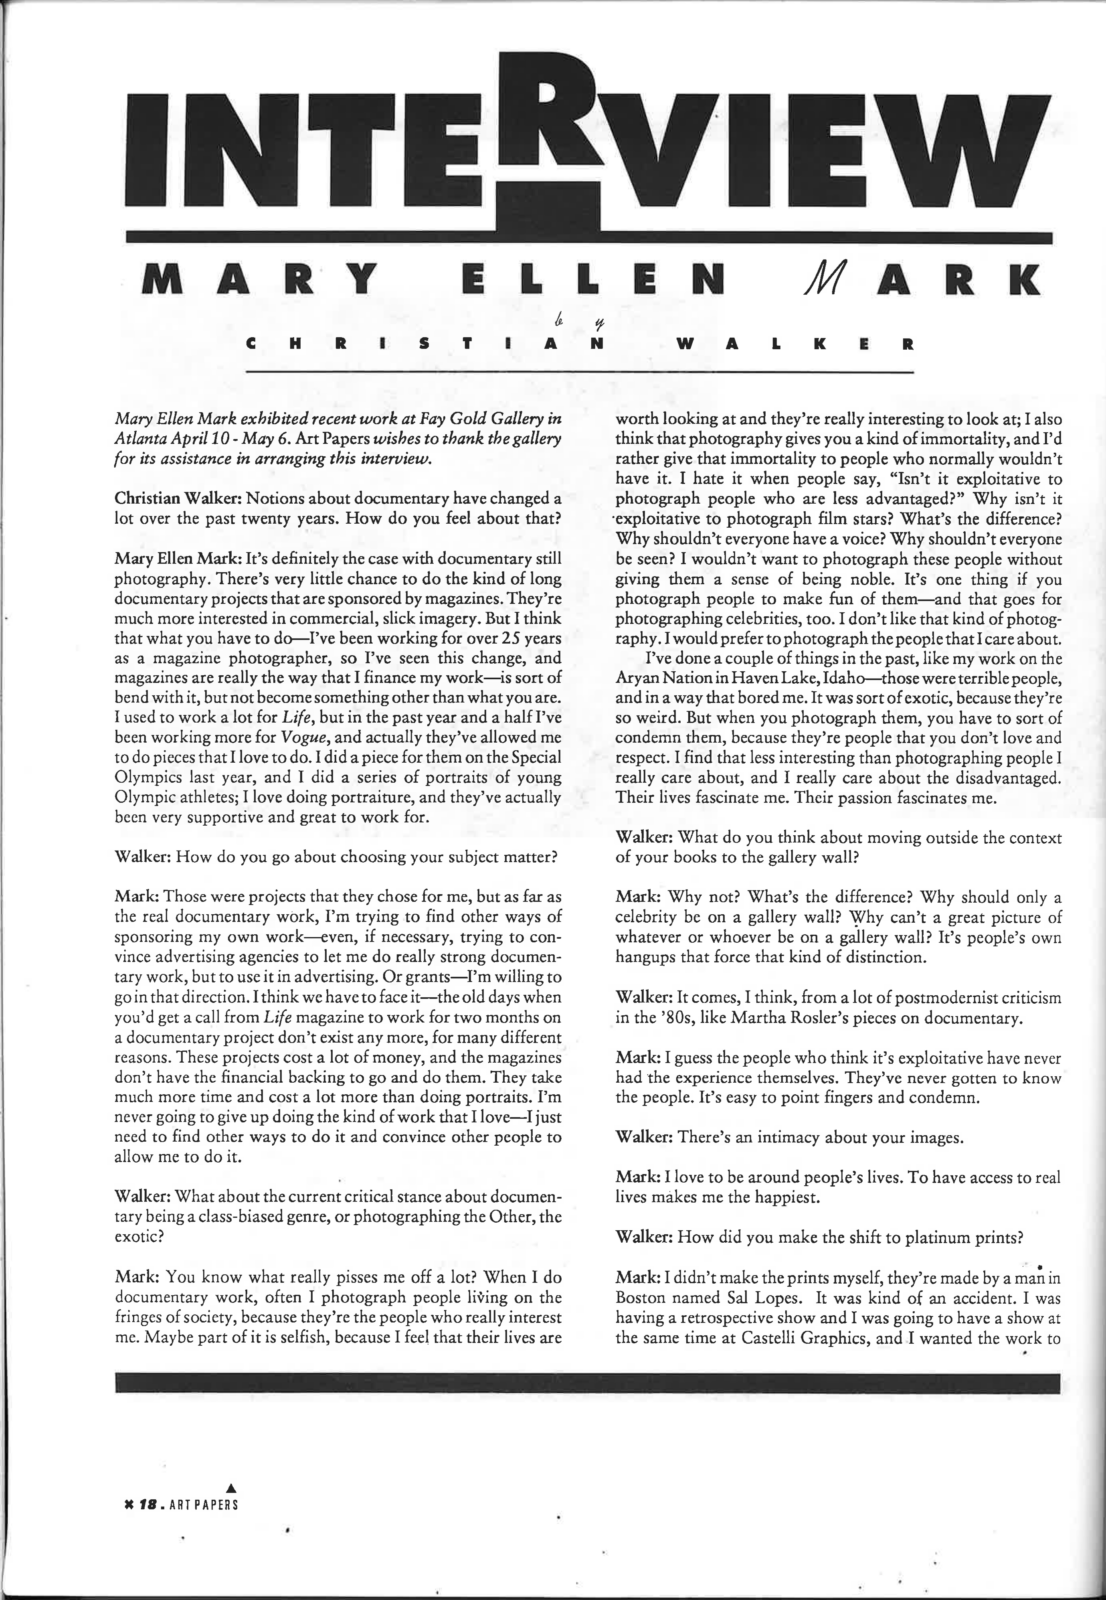 A black and white scan of the May/June 1992 edition of Art Papers featuring an Interview with Mary Ellen Mark by Christian Walker.